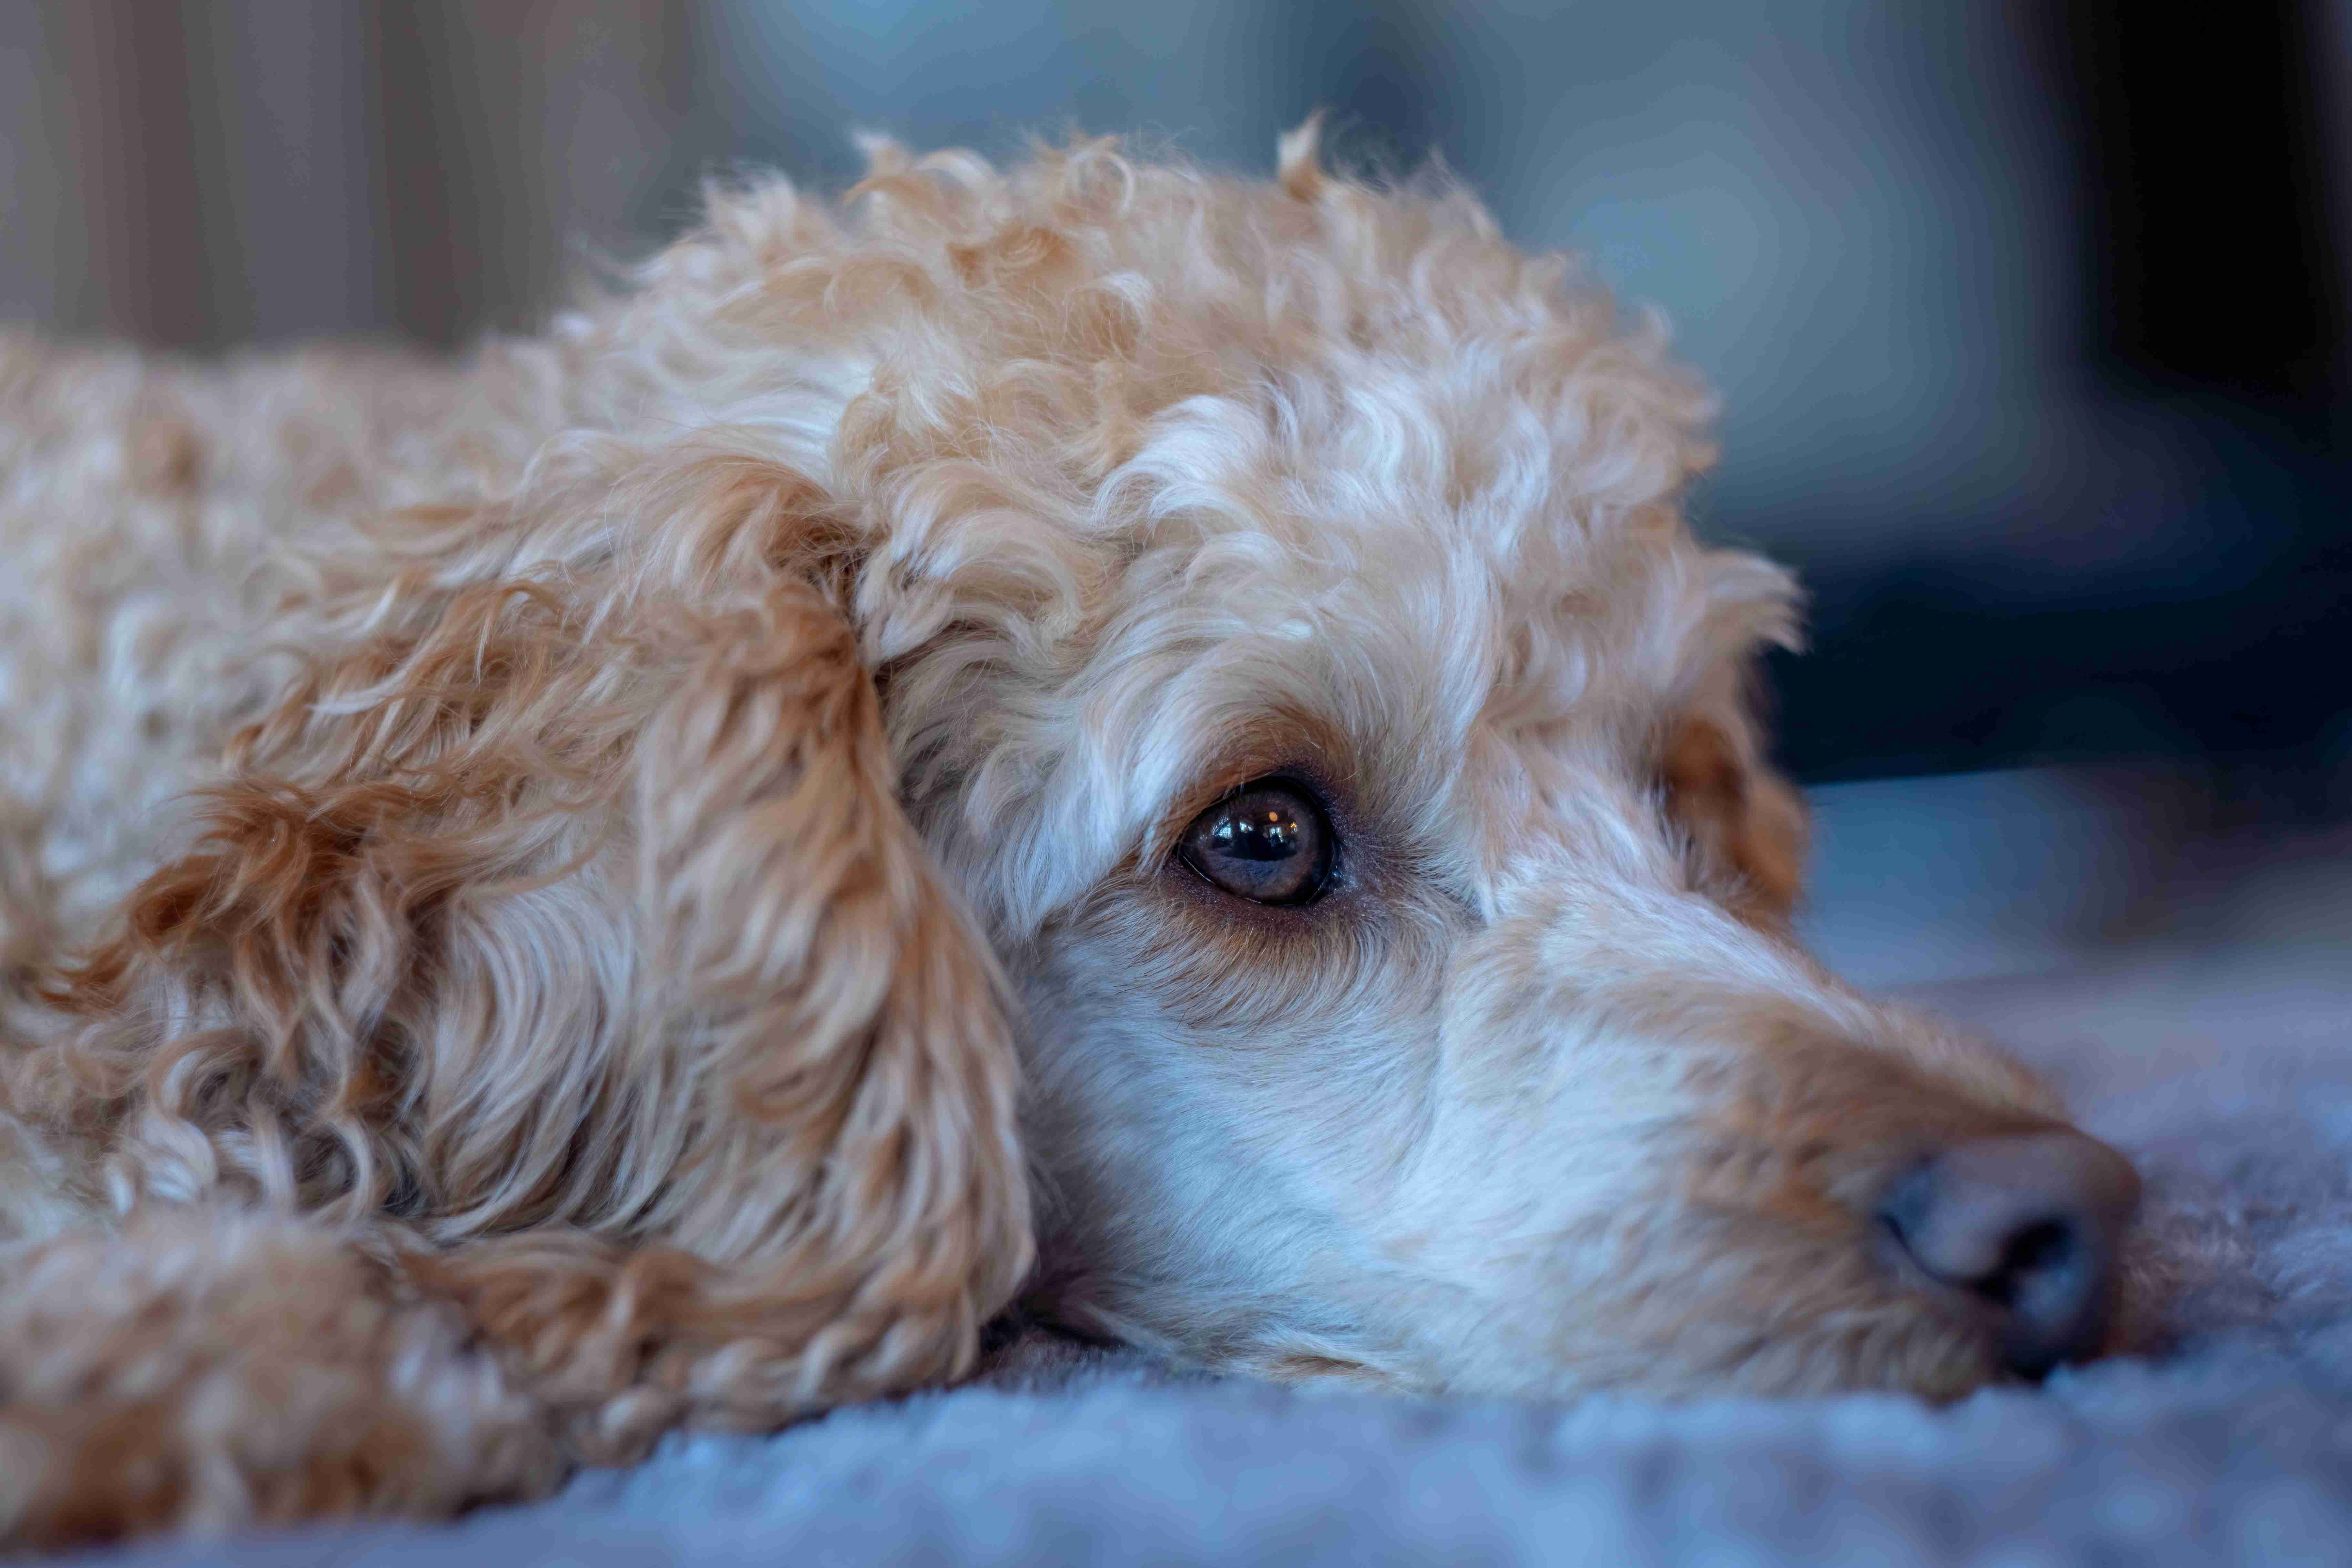 How do you establish a daily routine for your Poodle puppy?